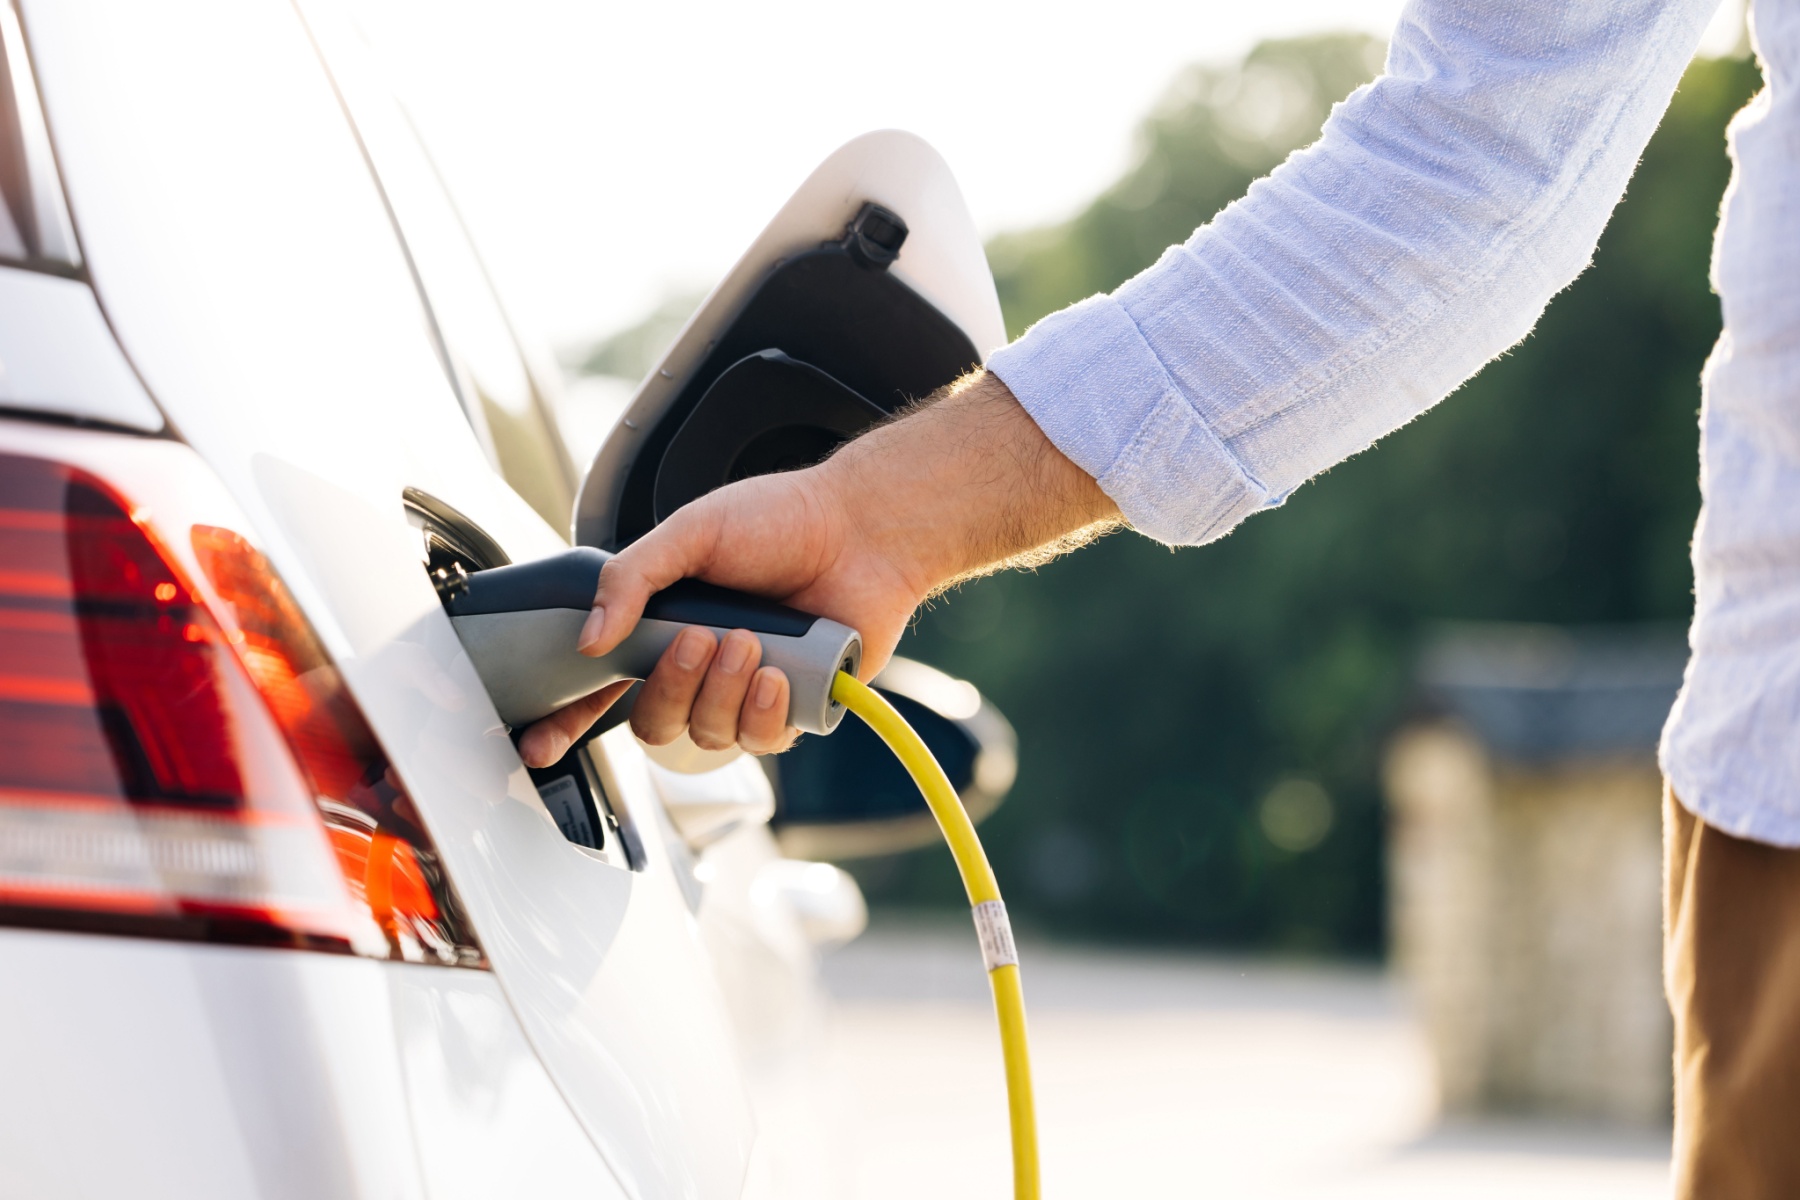 What you need to know if you plan on installing an EV charger at your home